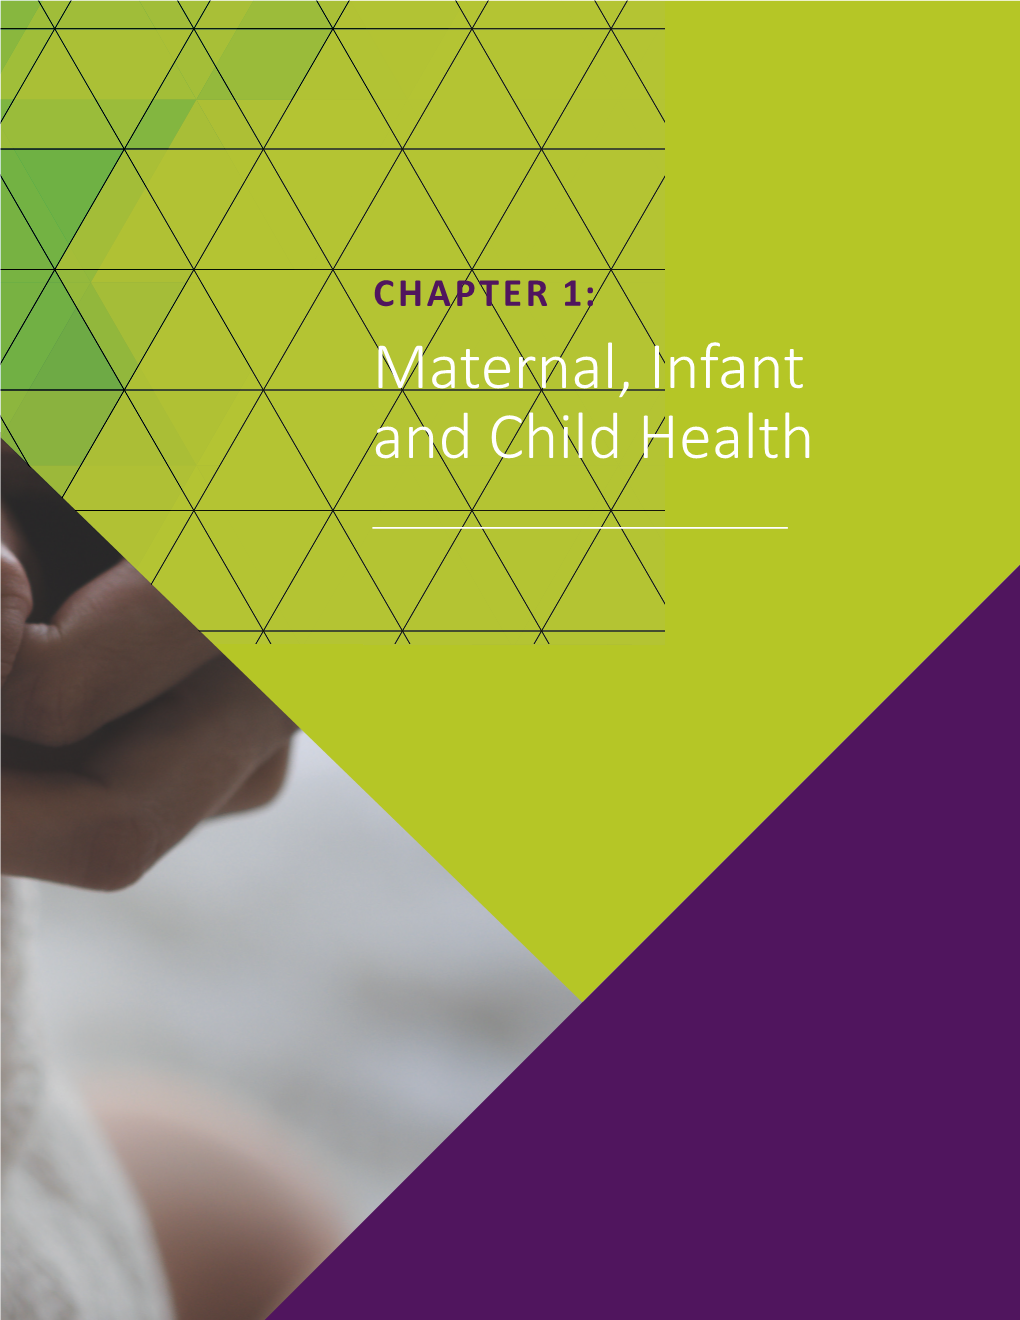 CHAPTER 1: Maternal, Infant and Child Health 78